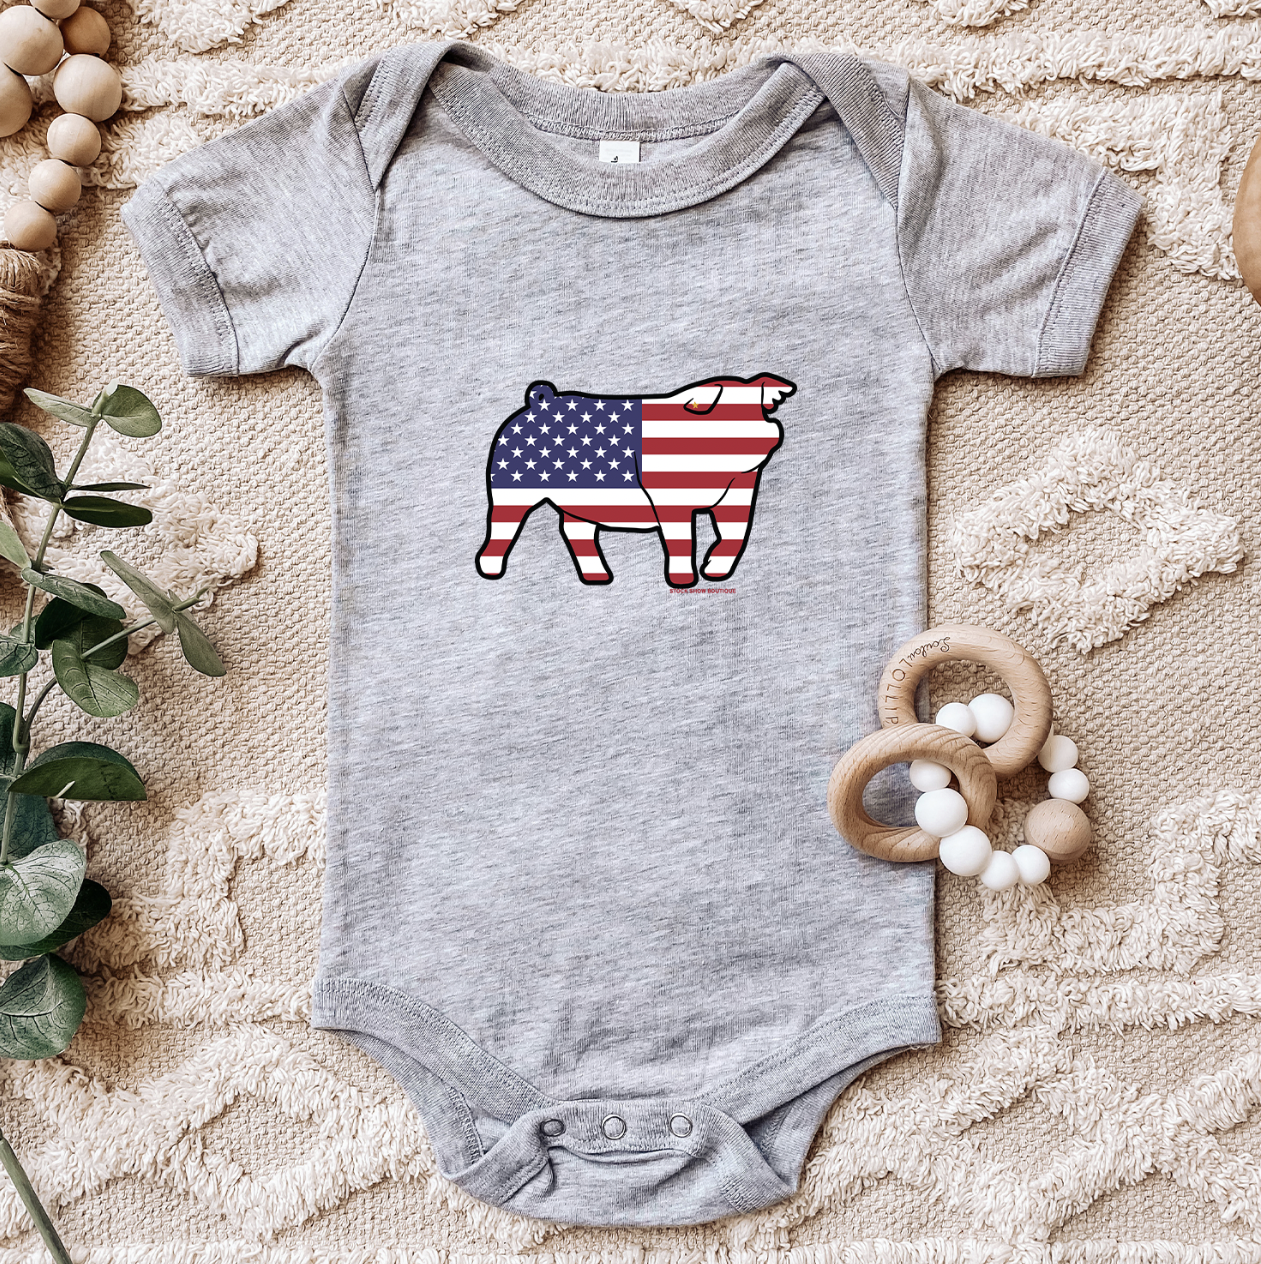 Patriotic Pig Down Ear One Piece/T-Shirt (Newborn - Youth XL) - Multiple Colors!